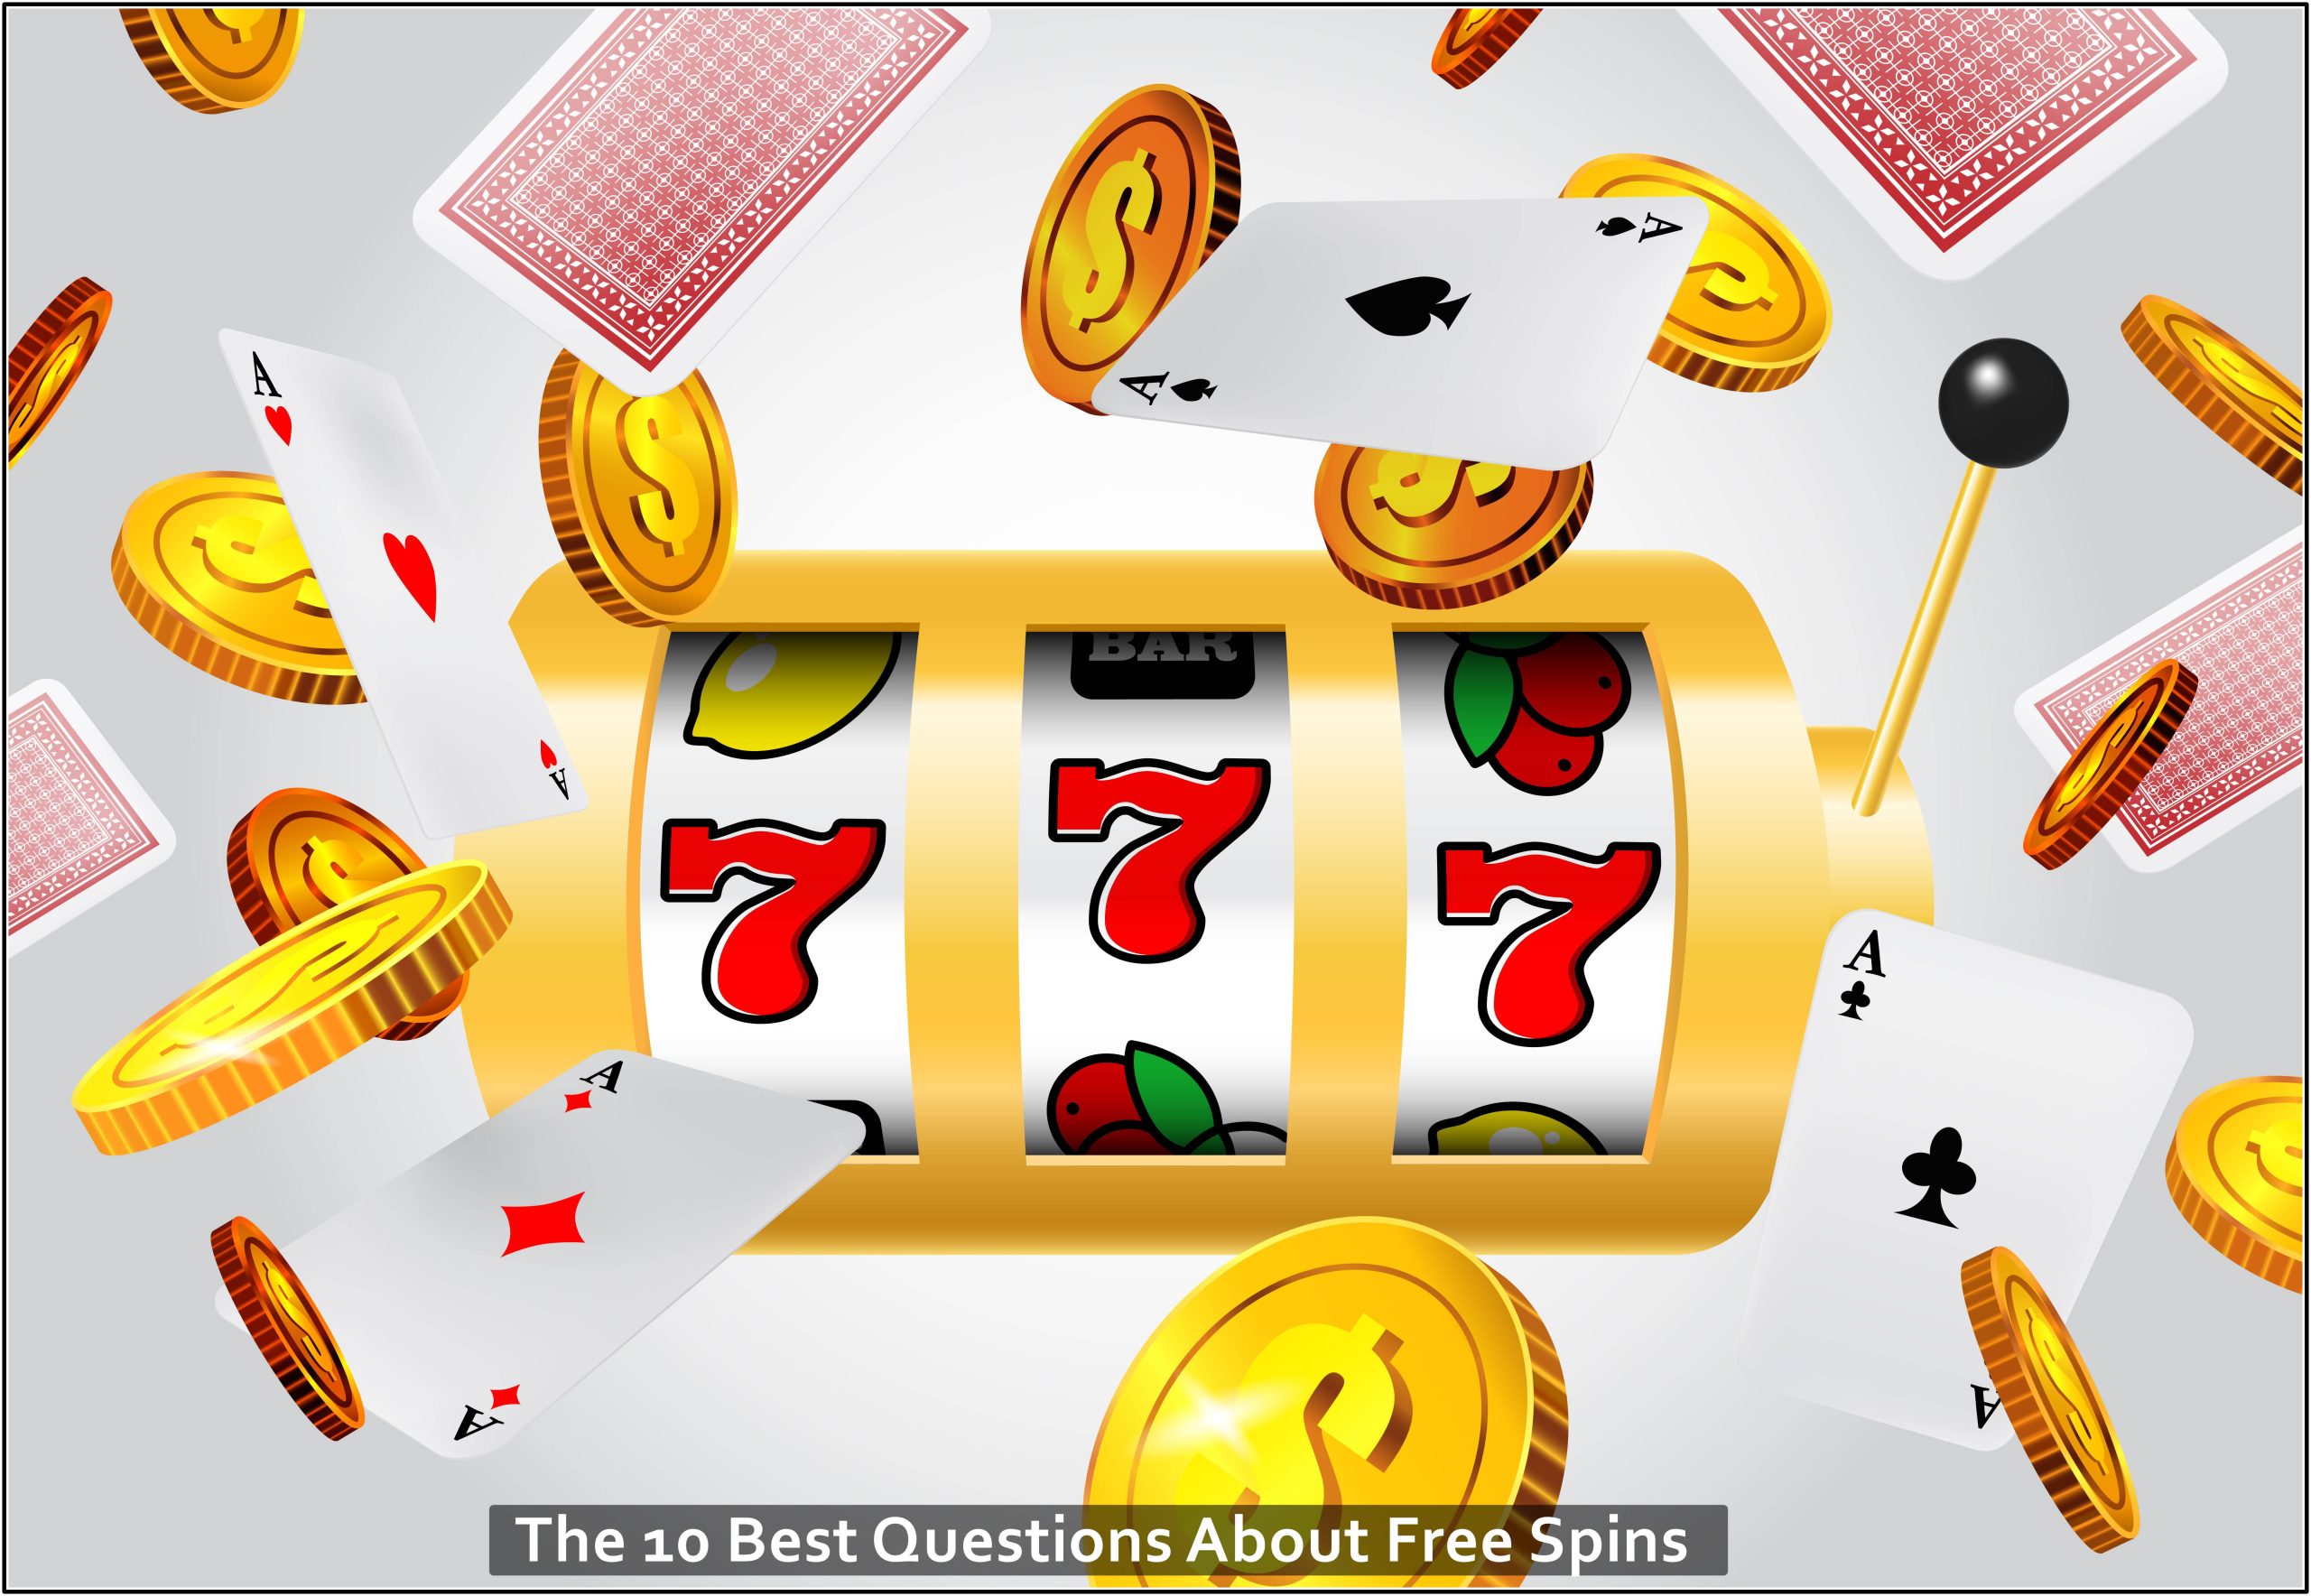 The 10 Best Questions About Free Spins